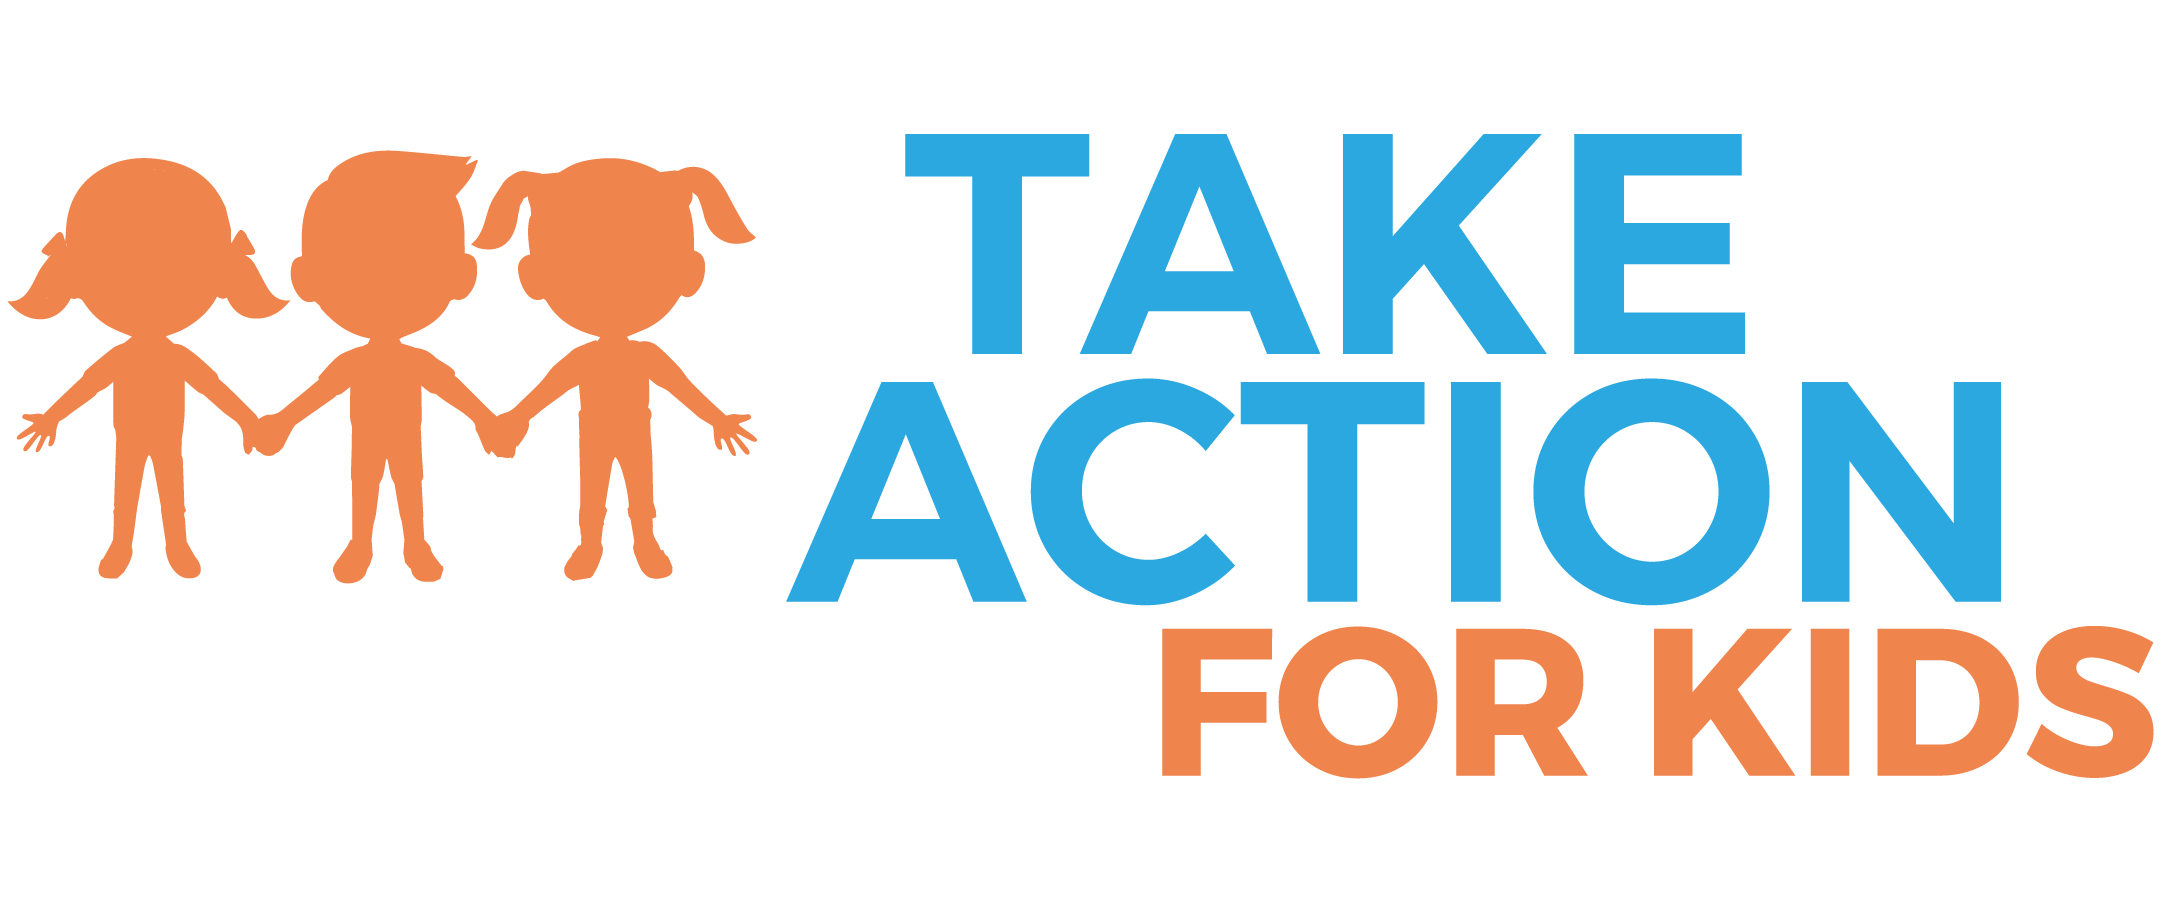 Take Action for Kids